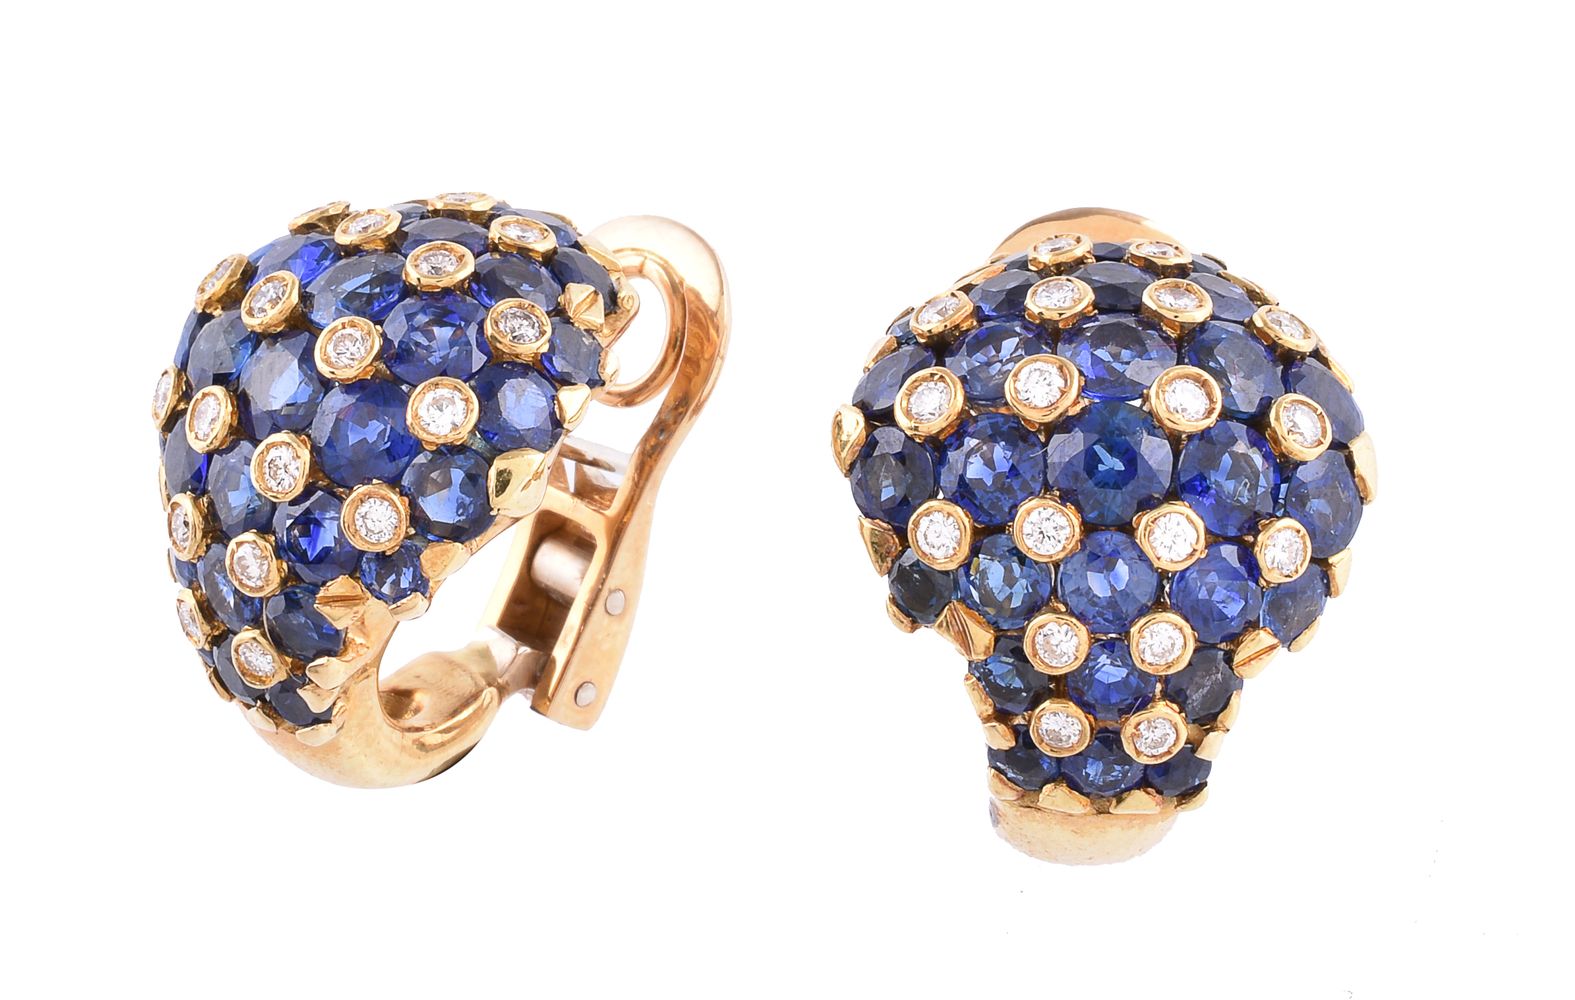 A pair of sapphire and diamond earrings and a ring by Tiffany & Co. - Image 2 of 3